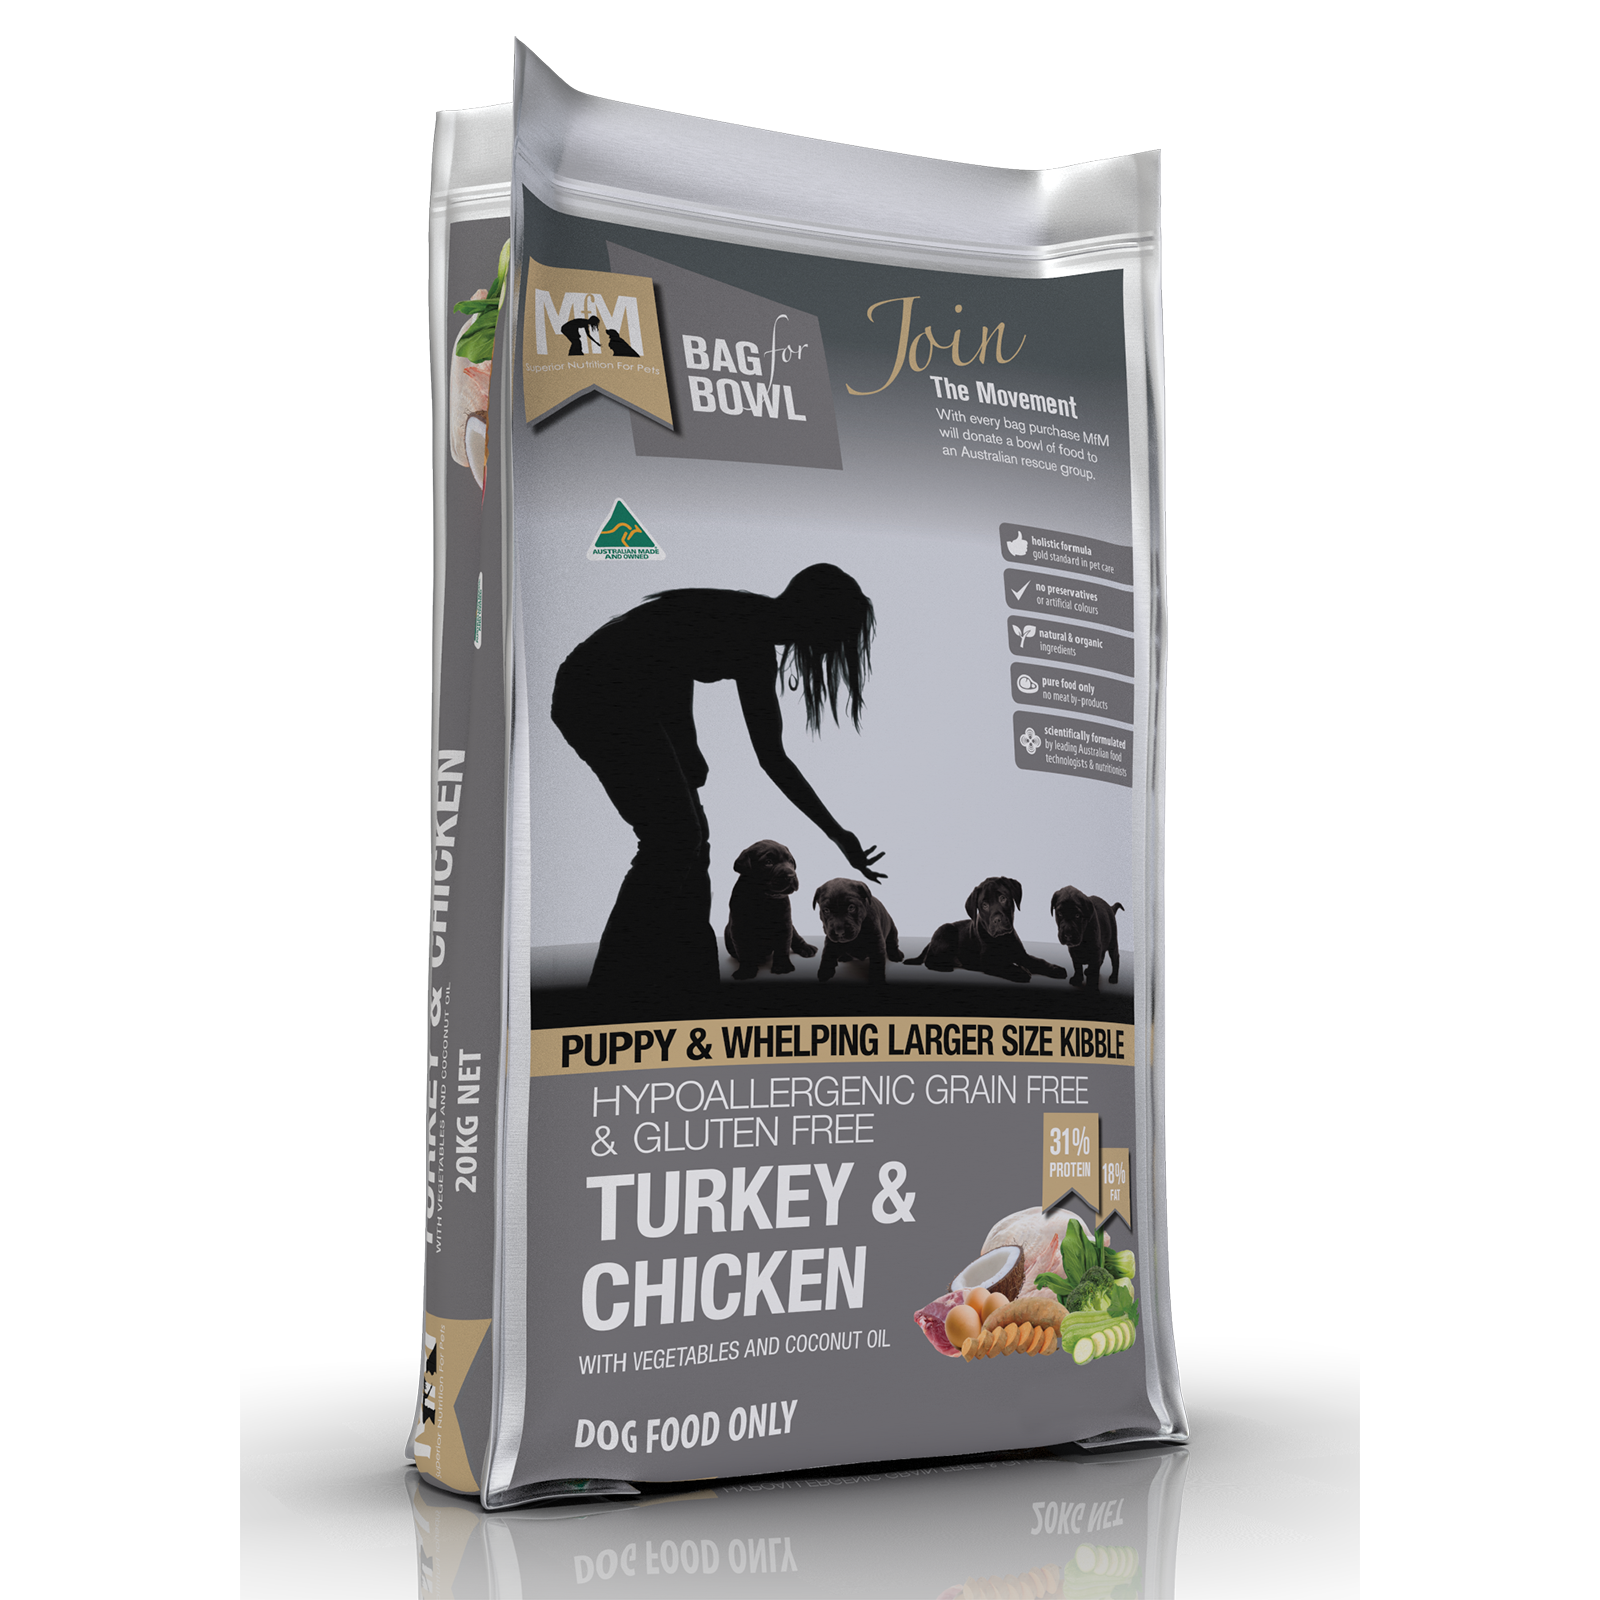 Meals For Mutts Grain Free Dog Food Puppy Large Kibble Turkey & Chicken